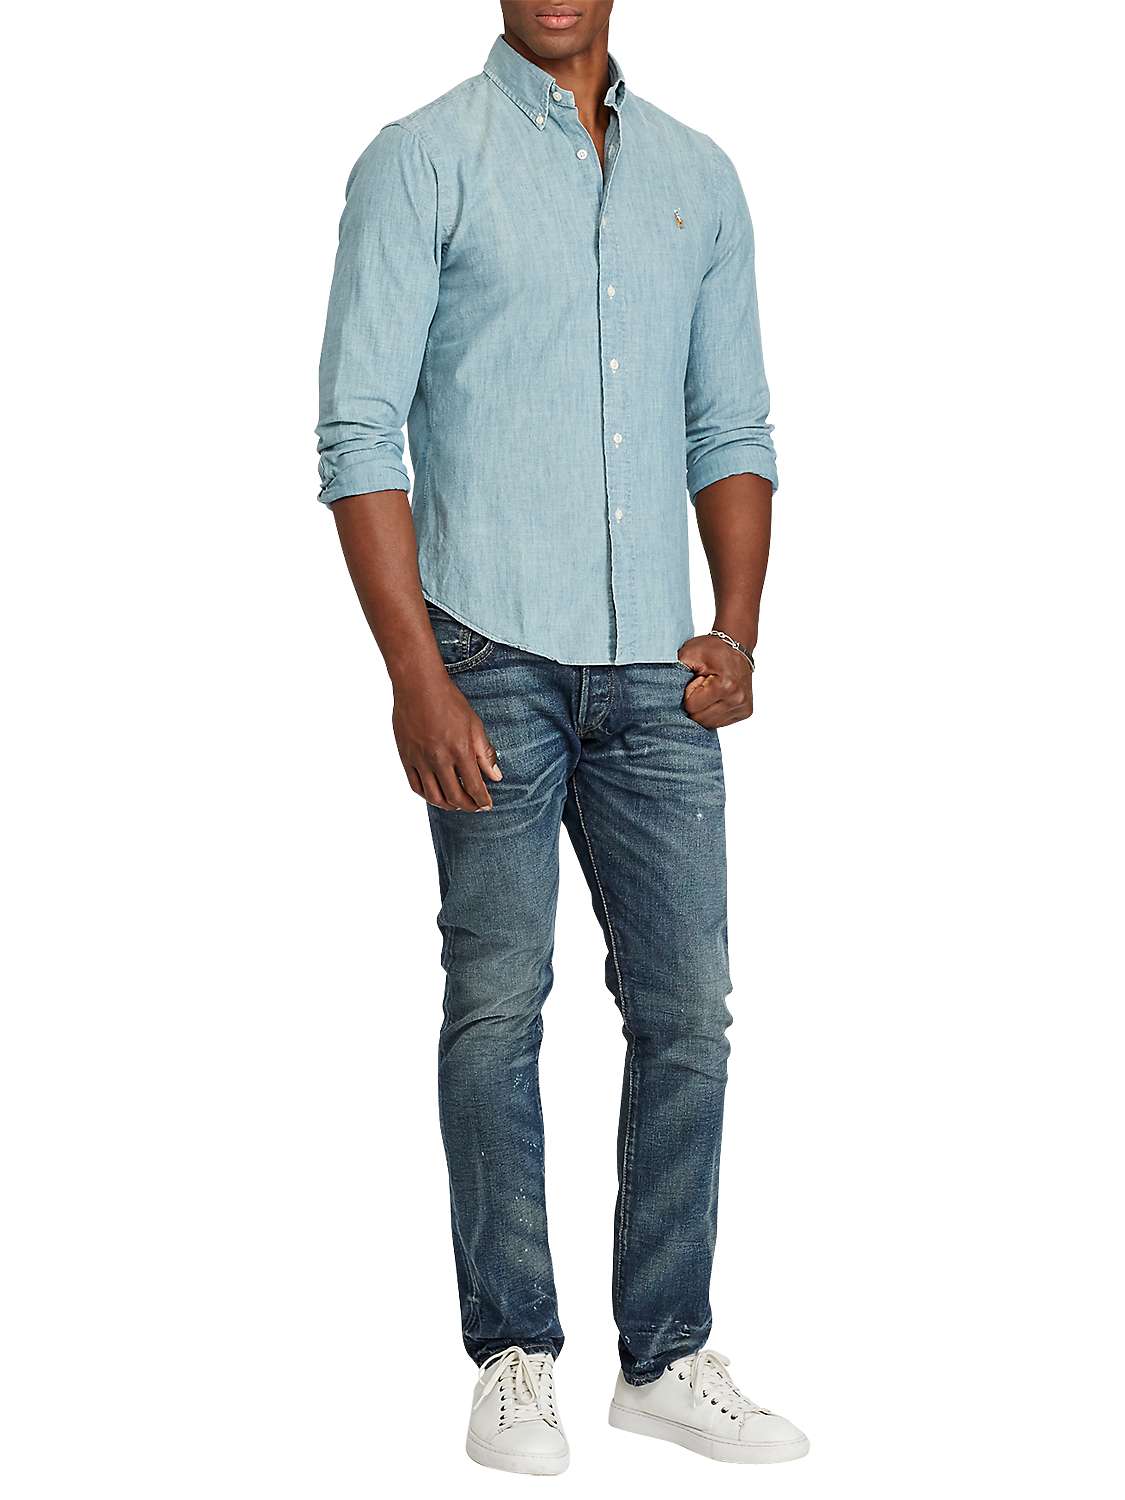 Buy Polo Ralph Lauren Chambray Slim Fit Shirt, Chambray Online at johnlewis.com